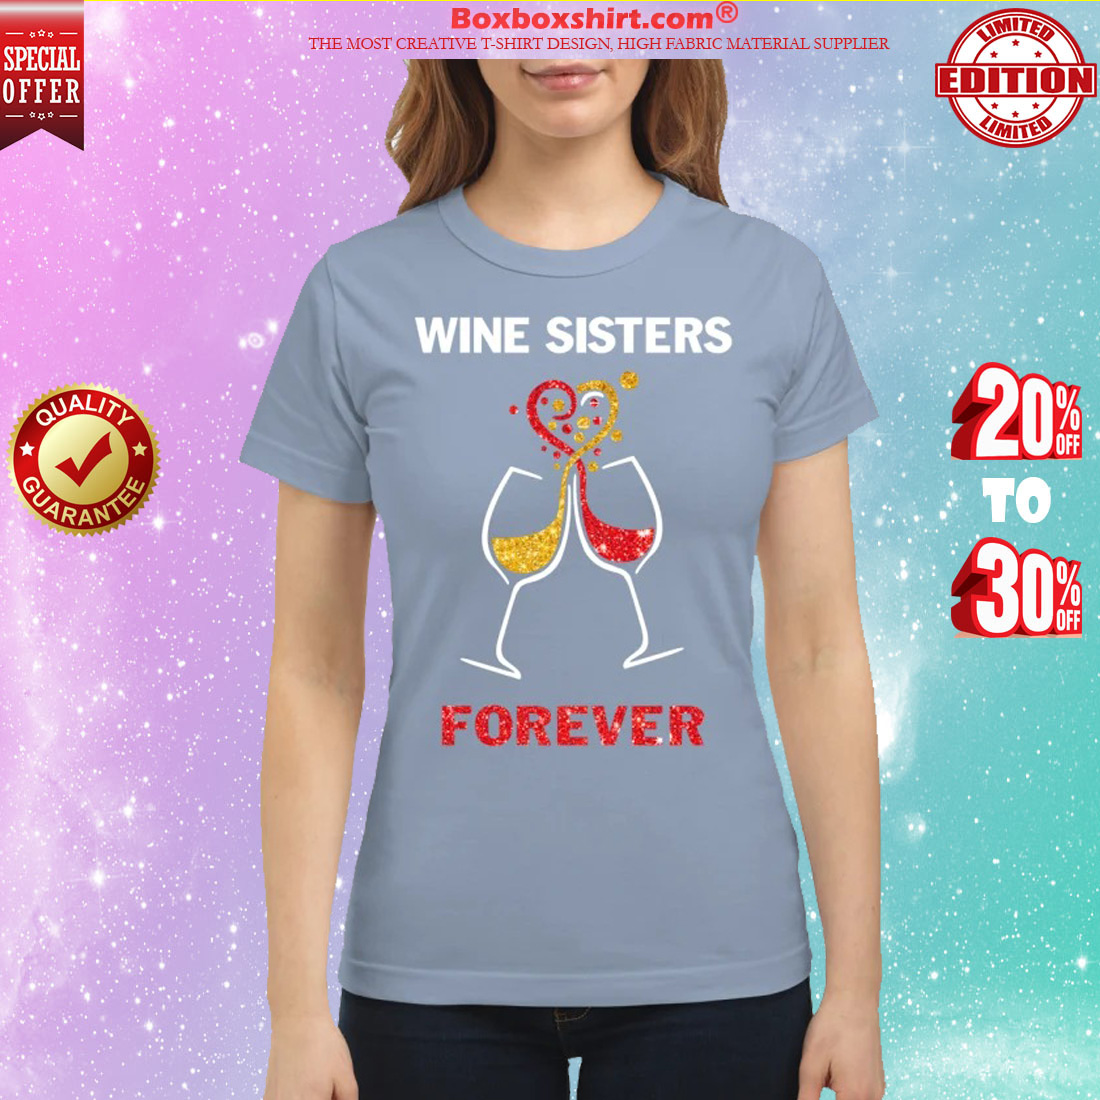 Wine sisters forever classic shirt